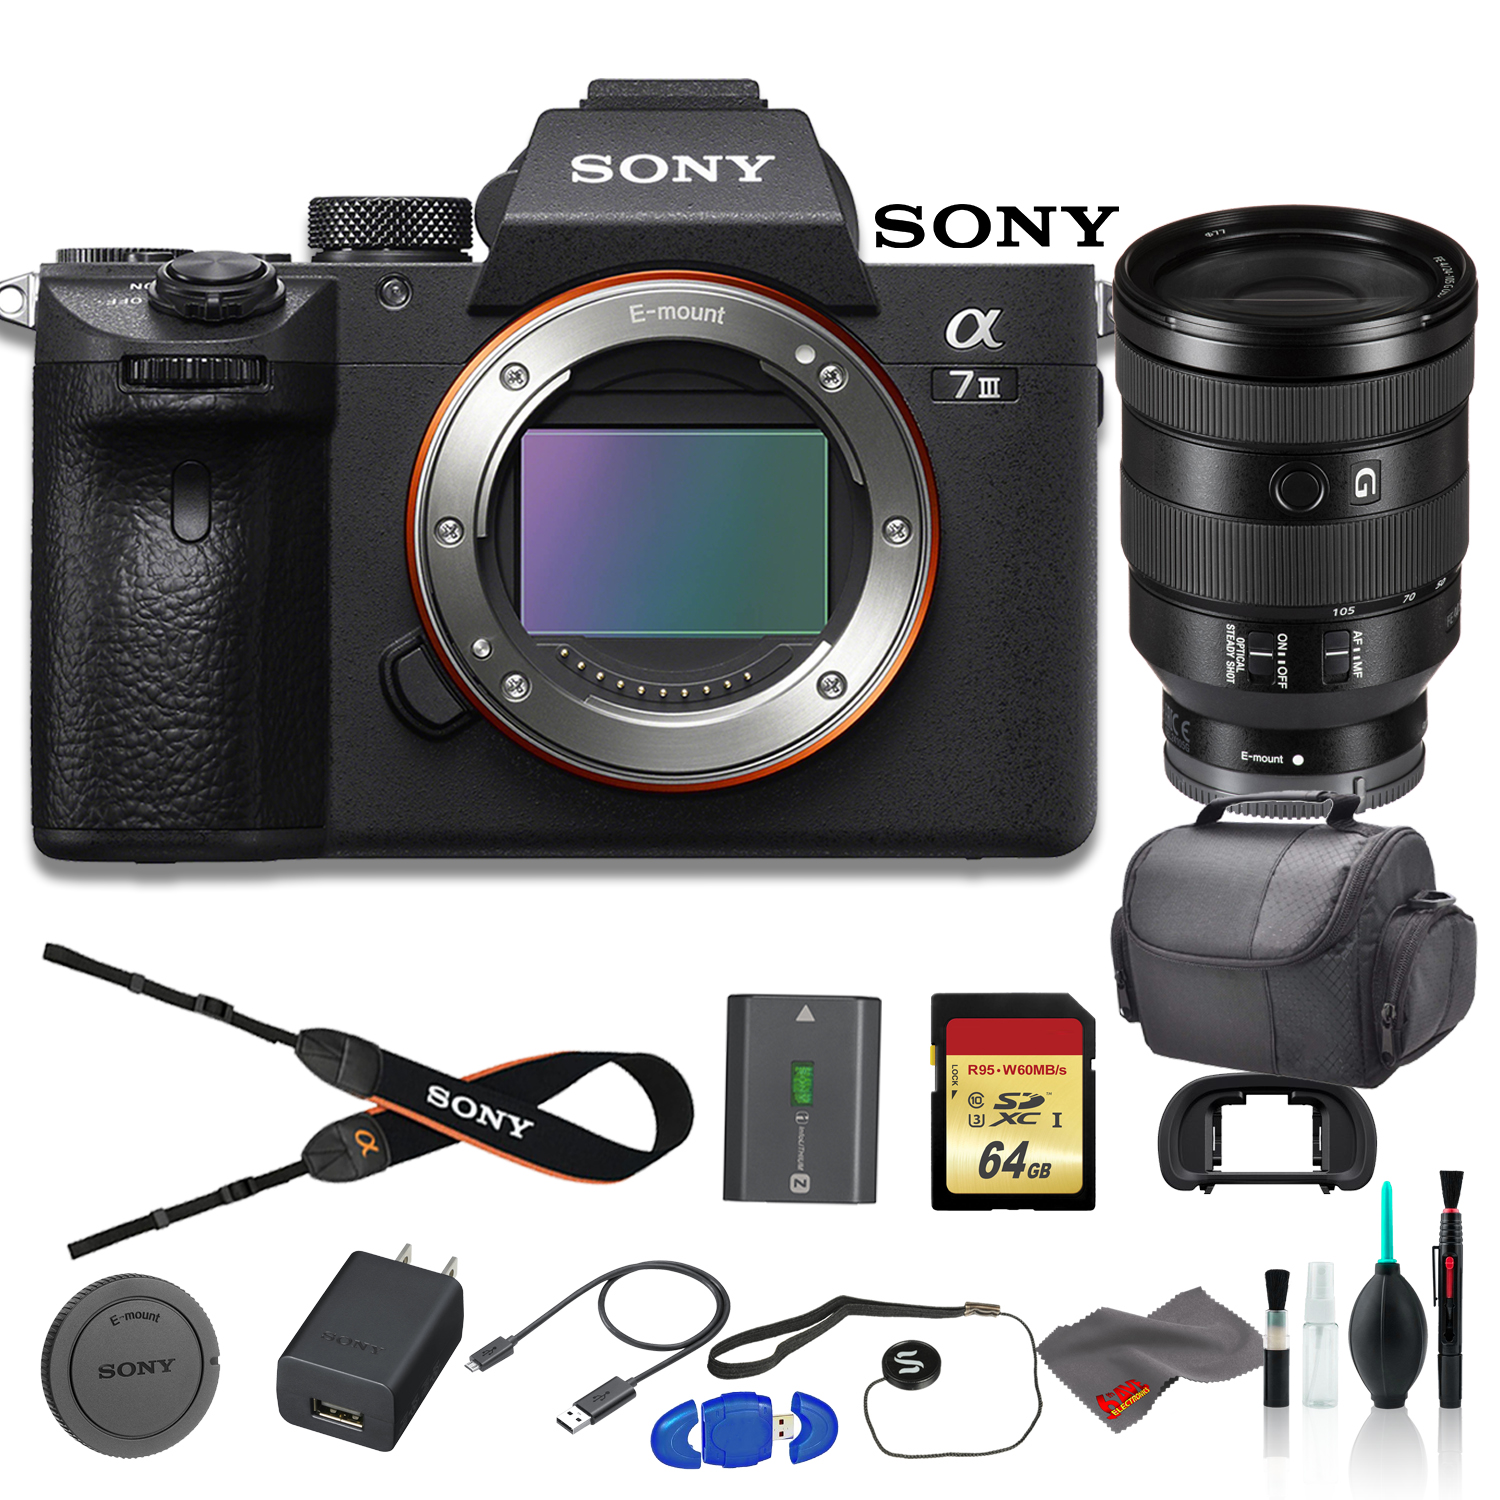 Sony Alpha a7 III Mirrorless Digital Camera Bundle - With Sony FE 24-105mm f/4 Lens, Bag, 64GB Memory Card, Memory Card Reader and More - image 2 of 2